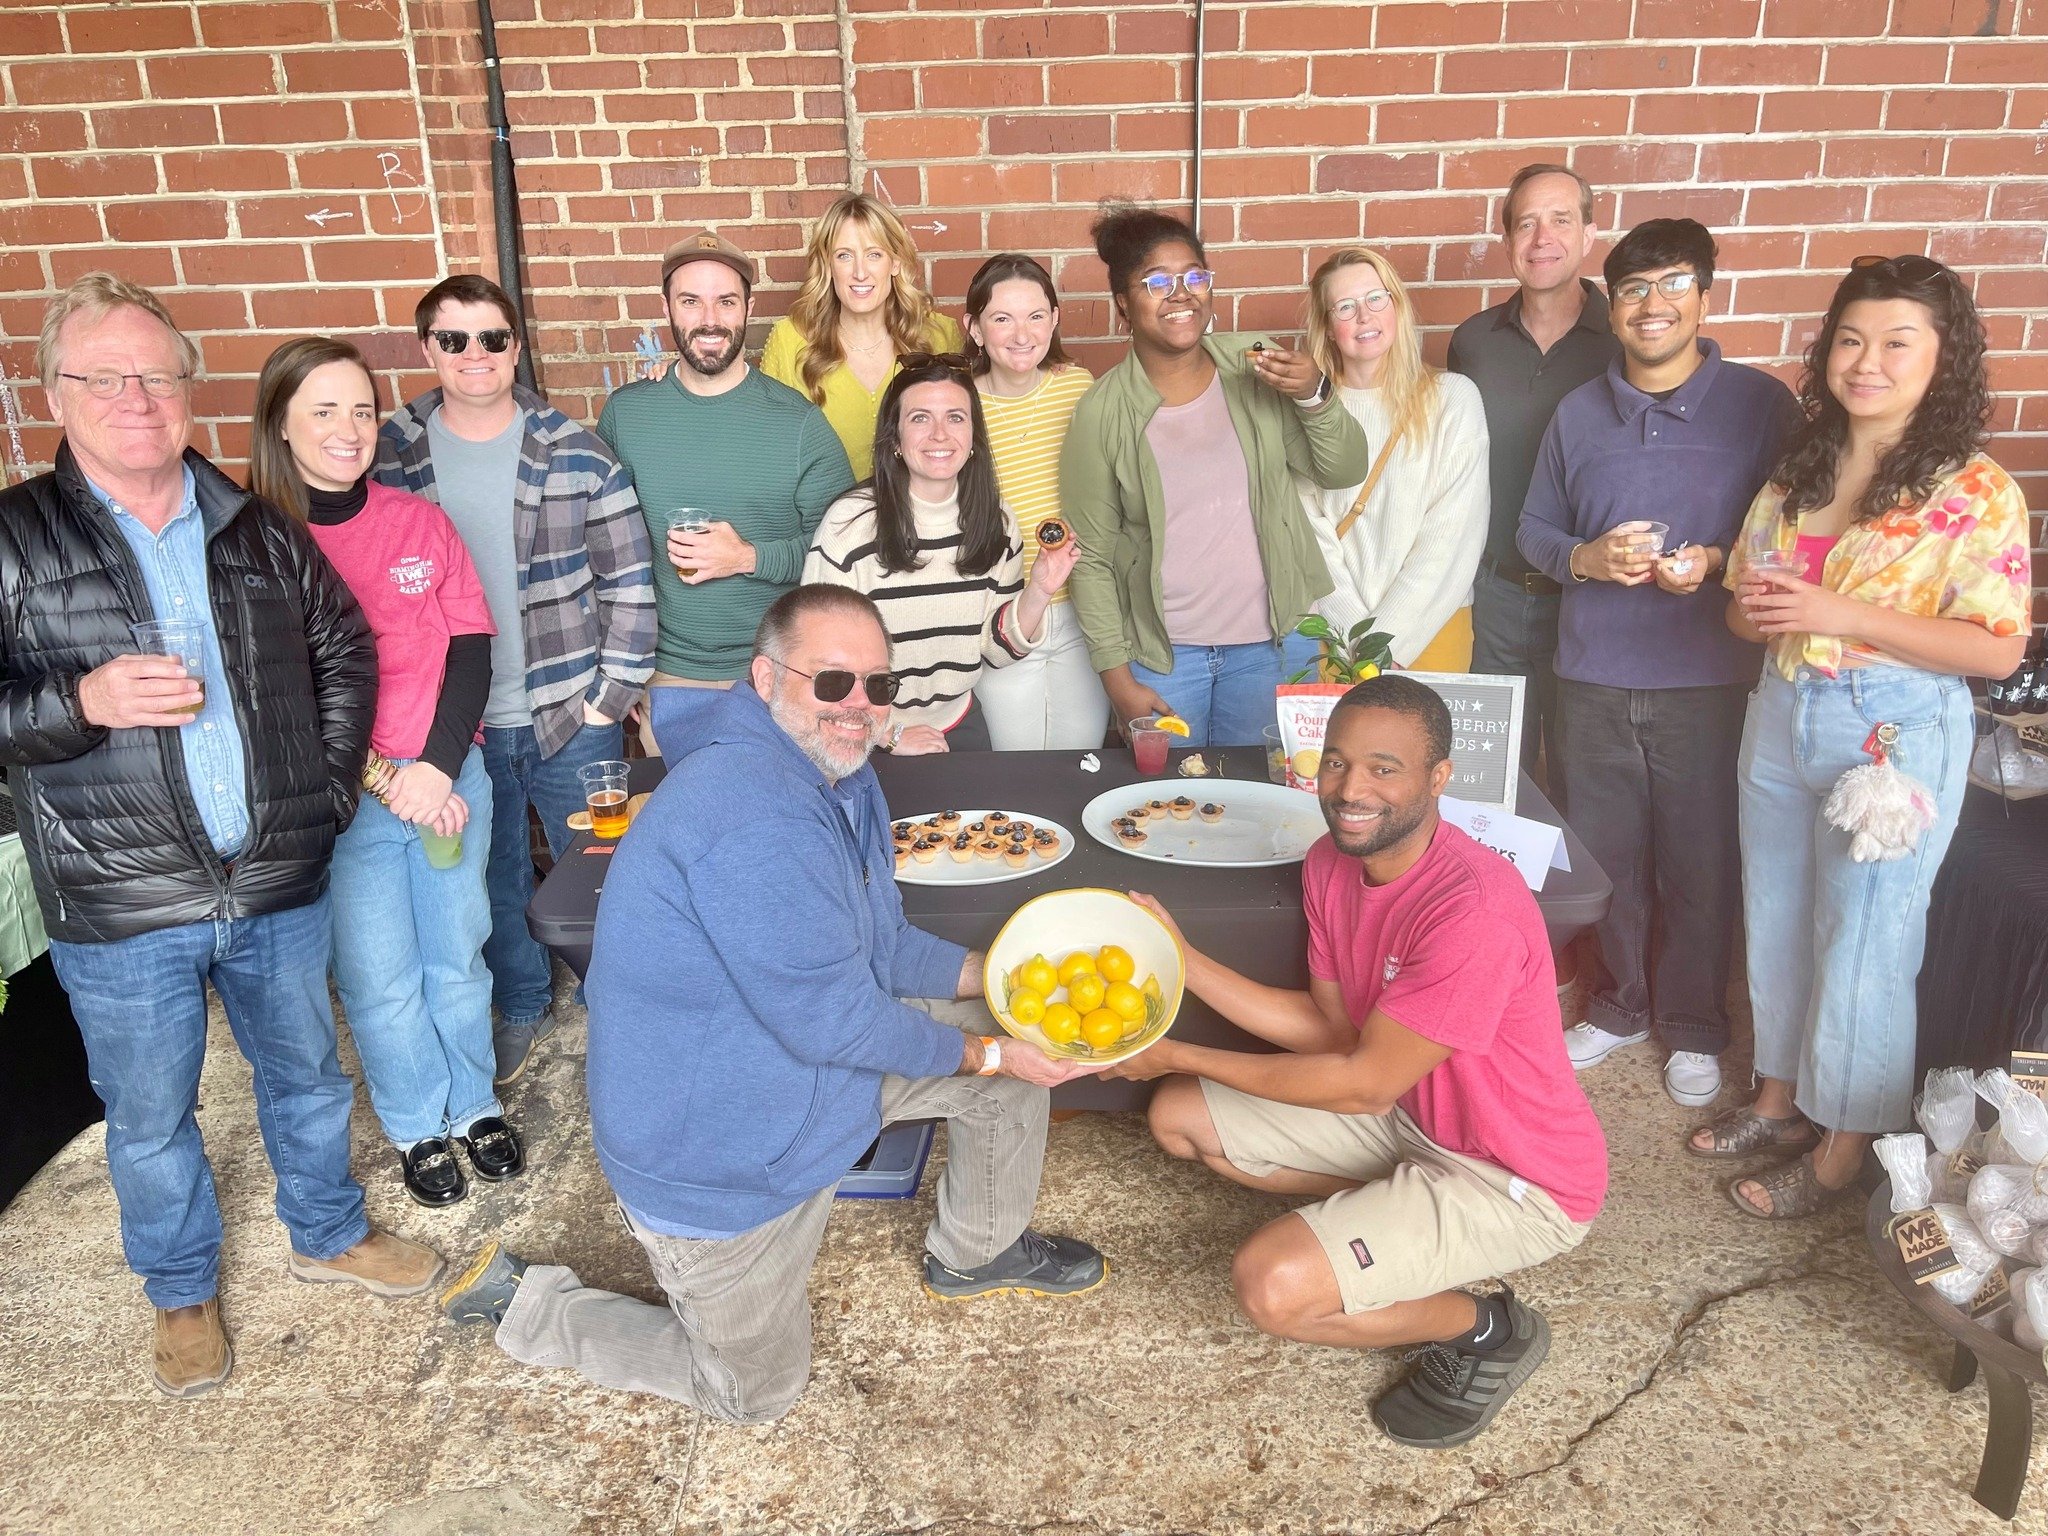 We had such a good time at the Great Birmingham Bake-Off this weekend at Cahaba Brewing. We were so proud to be a sponsor of such a fun event that supports a great cause: @workshopsempowerment. The team from WBA got together and picked out recipe to 